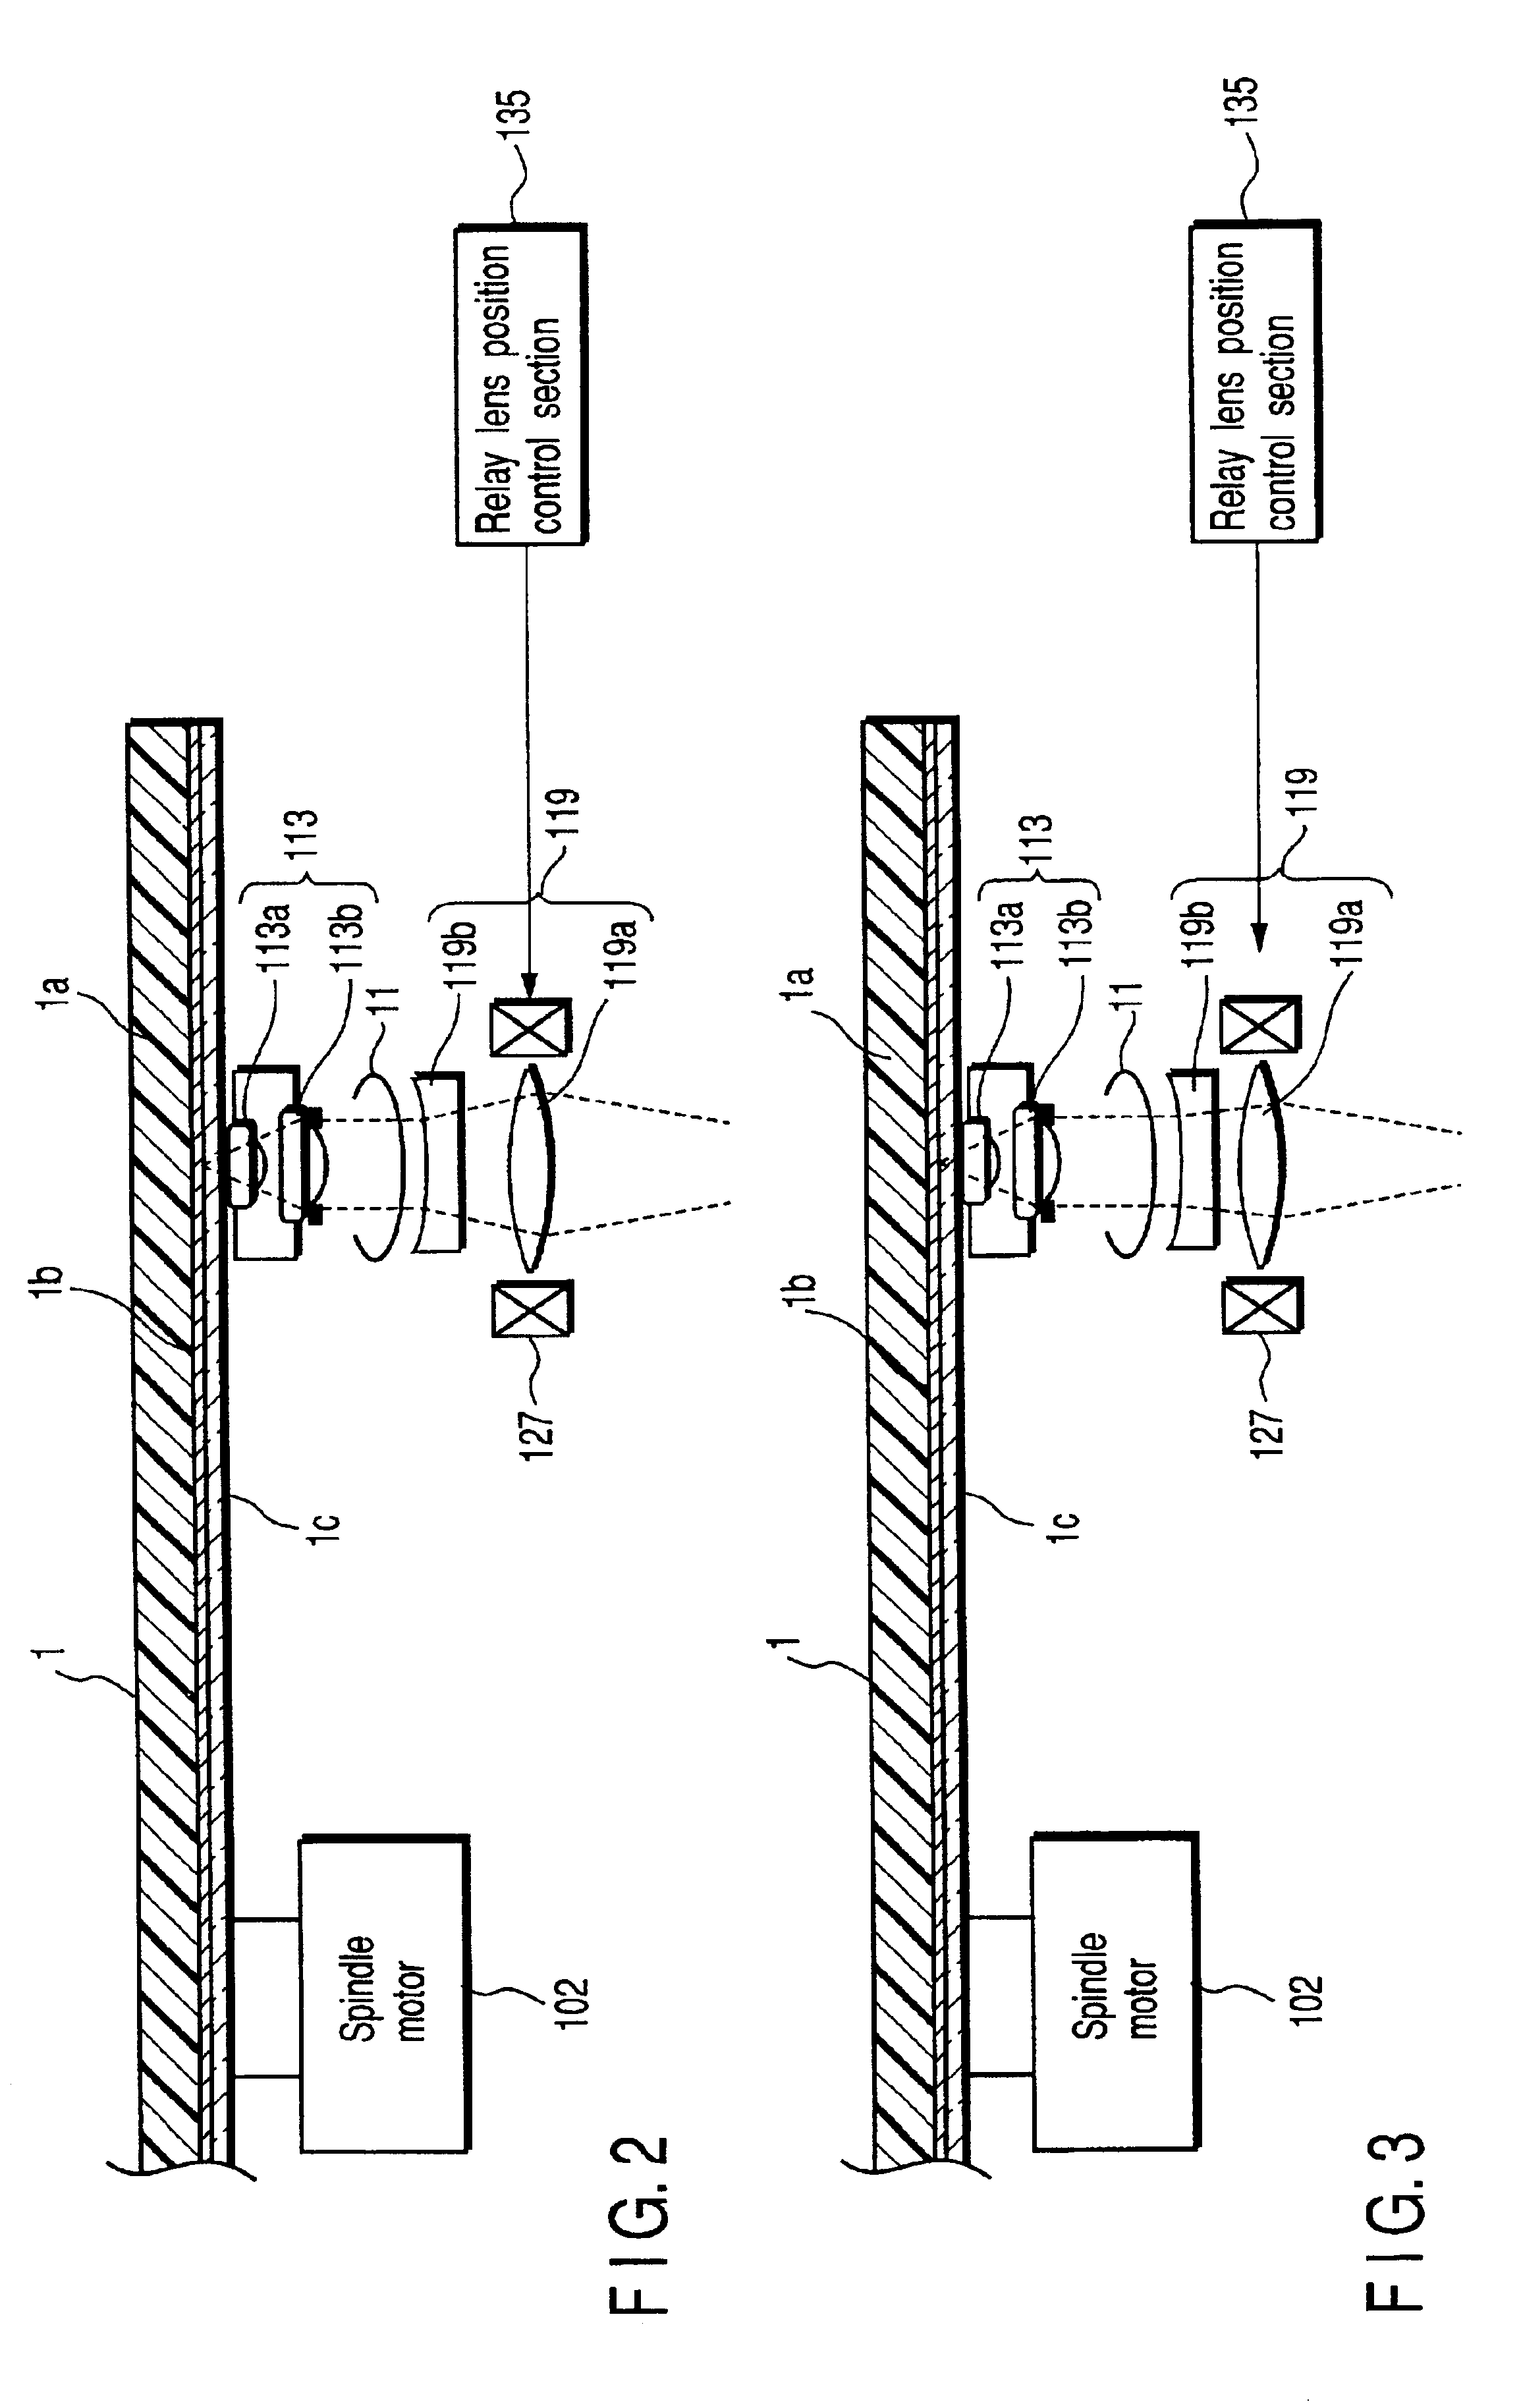 Optical disk unit for recording or reproducing information